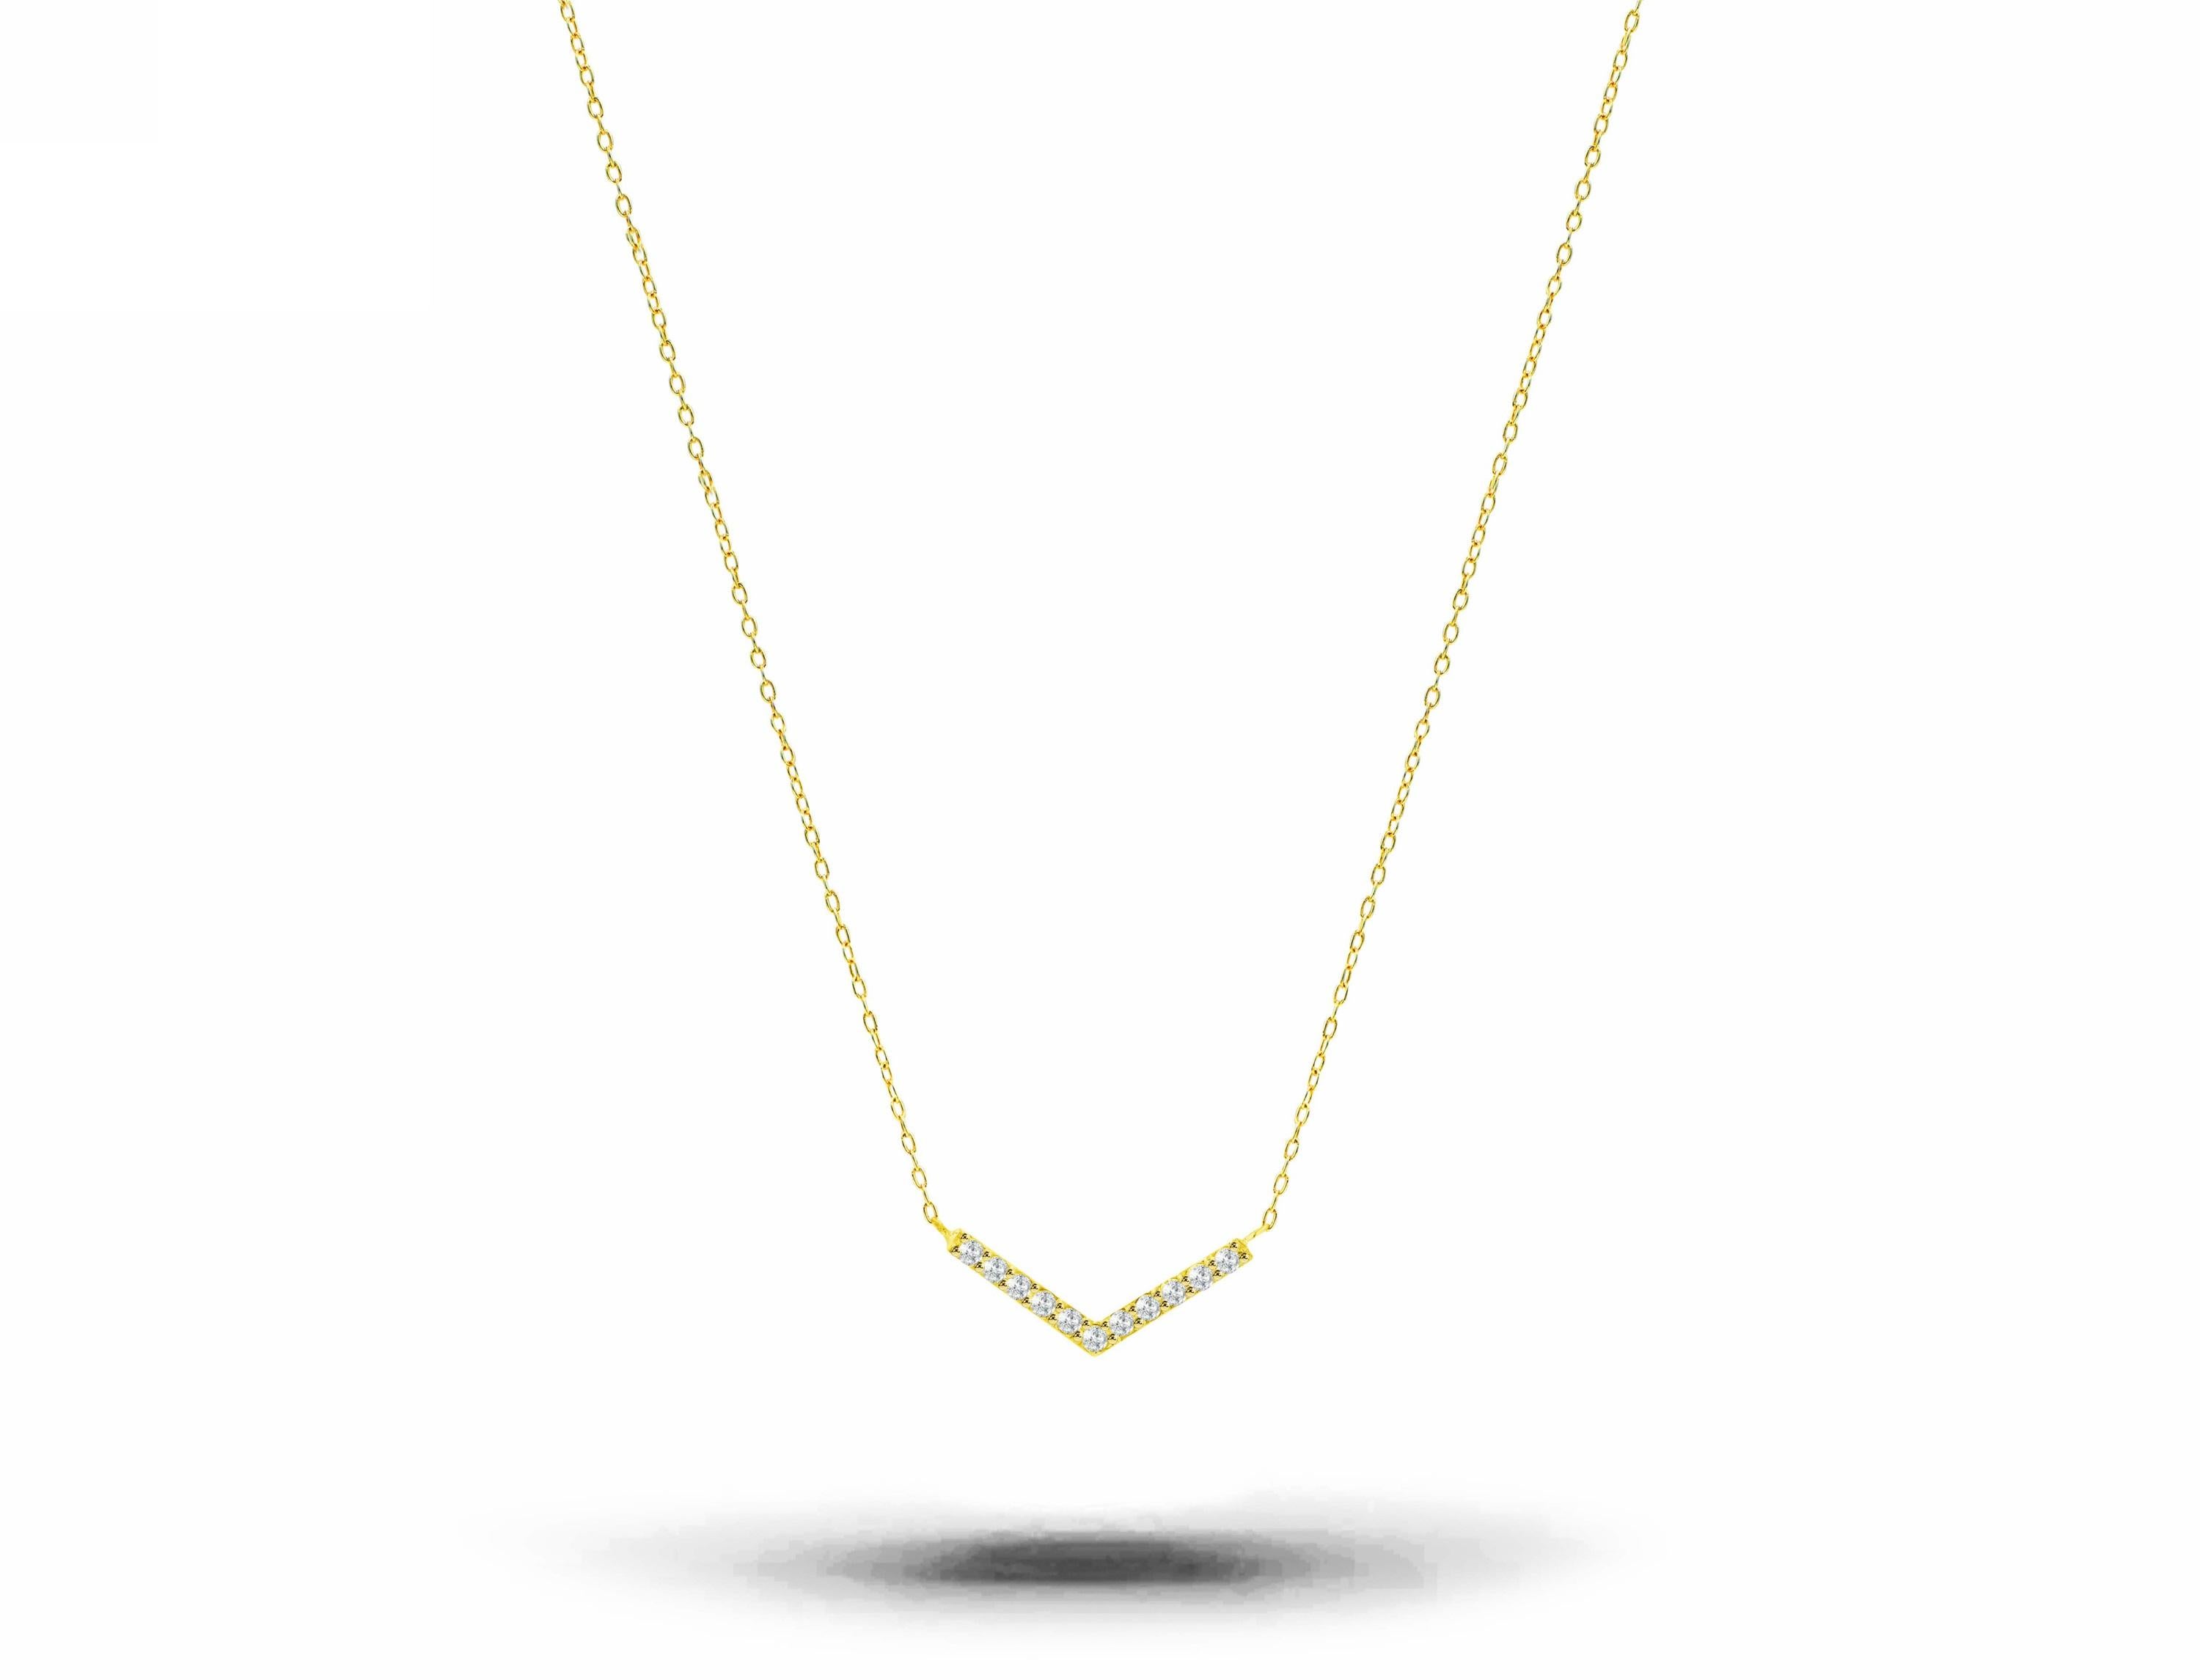 Delicate Dainty Chevron Necklace with Natural Diamond made of 14k solid gold.
Available in three colors of gold: Rose Gold / White Gold / Yellow Gold.

This modern minimalist necklace is a perfect gift for loved once and perfect to wear any occasion